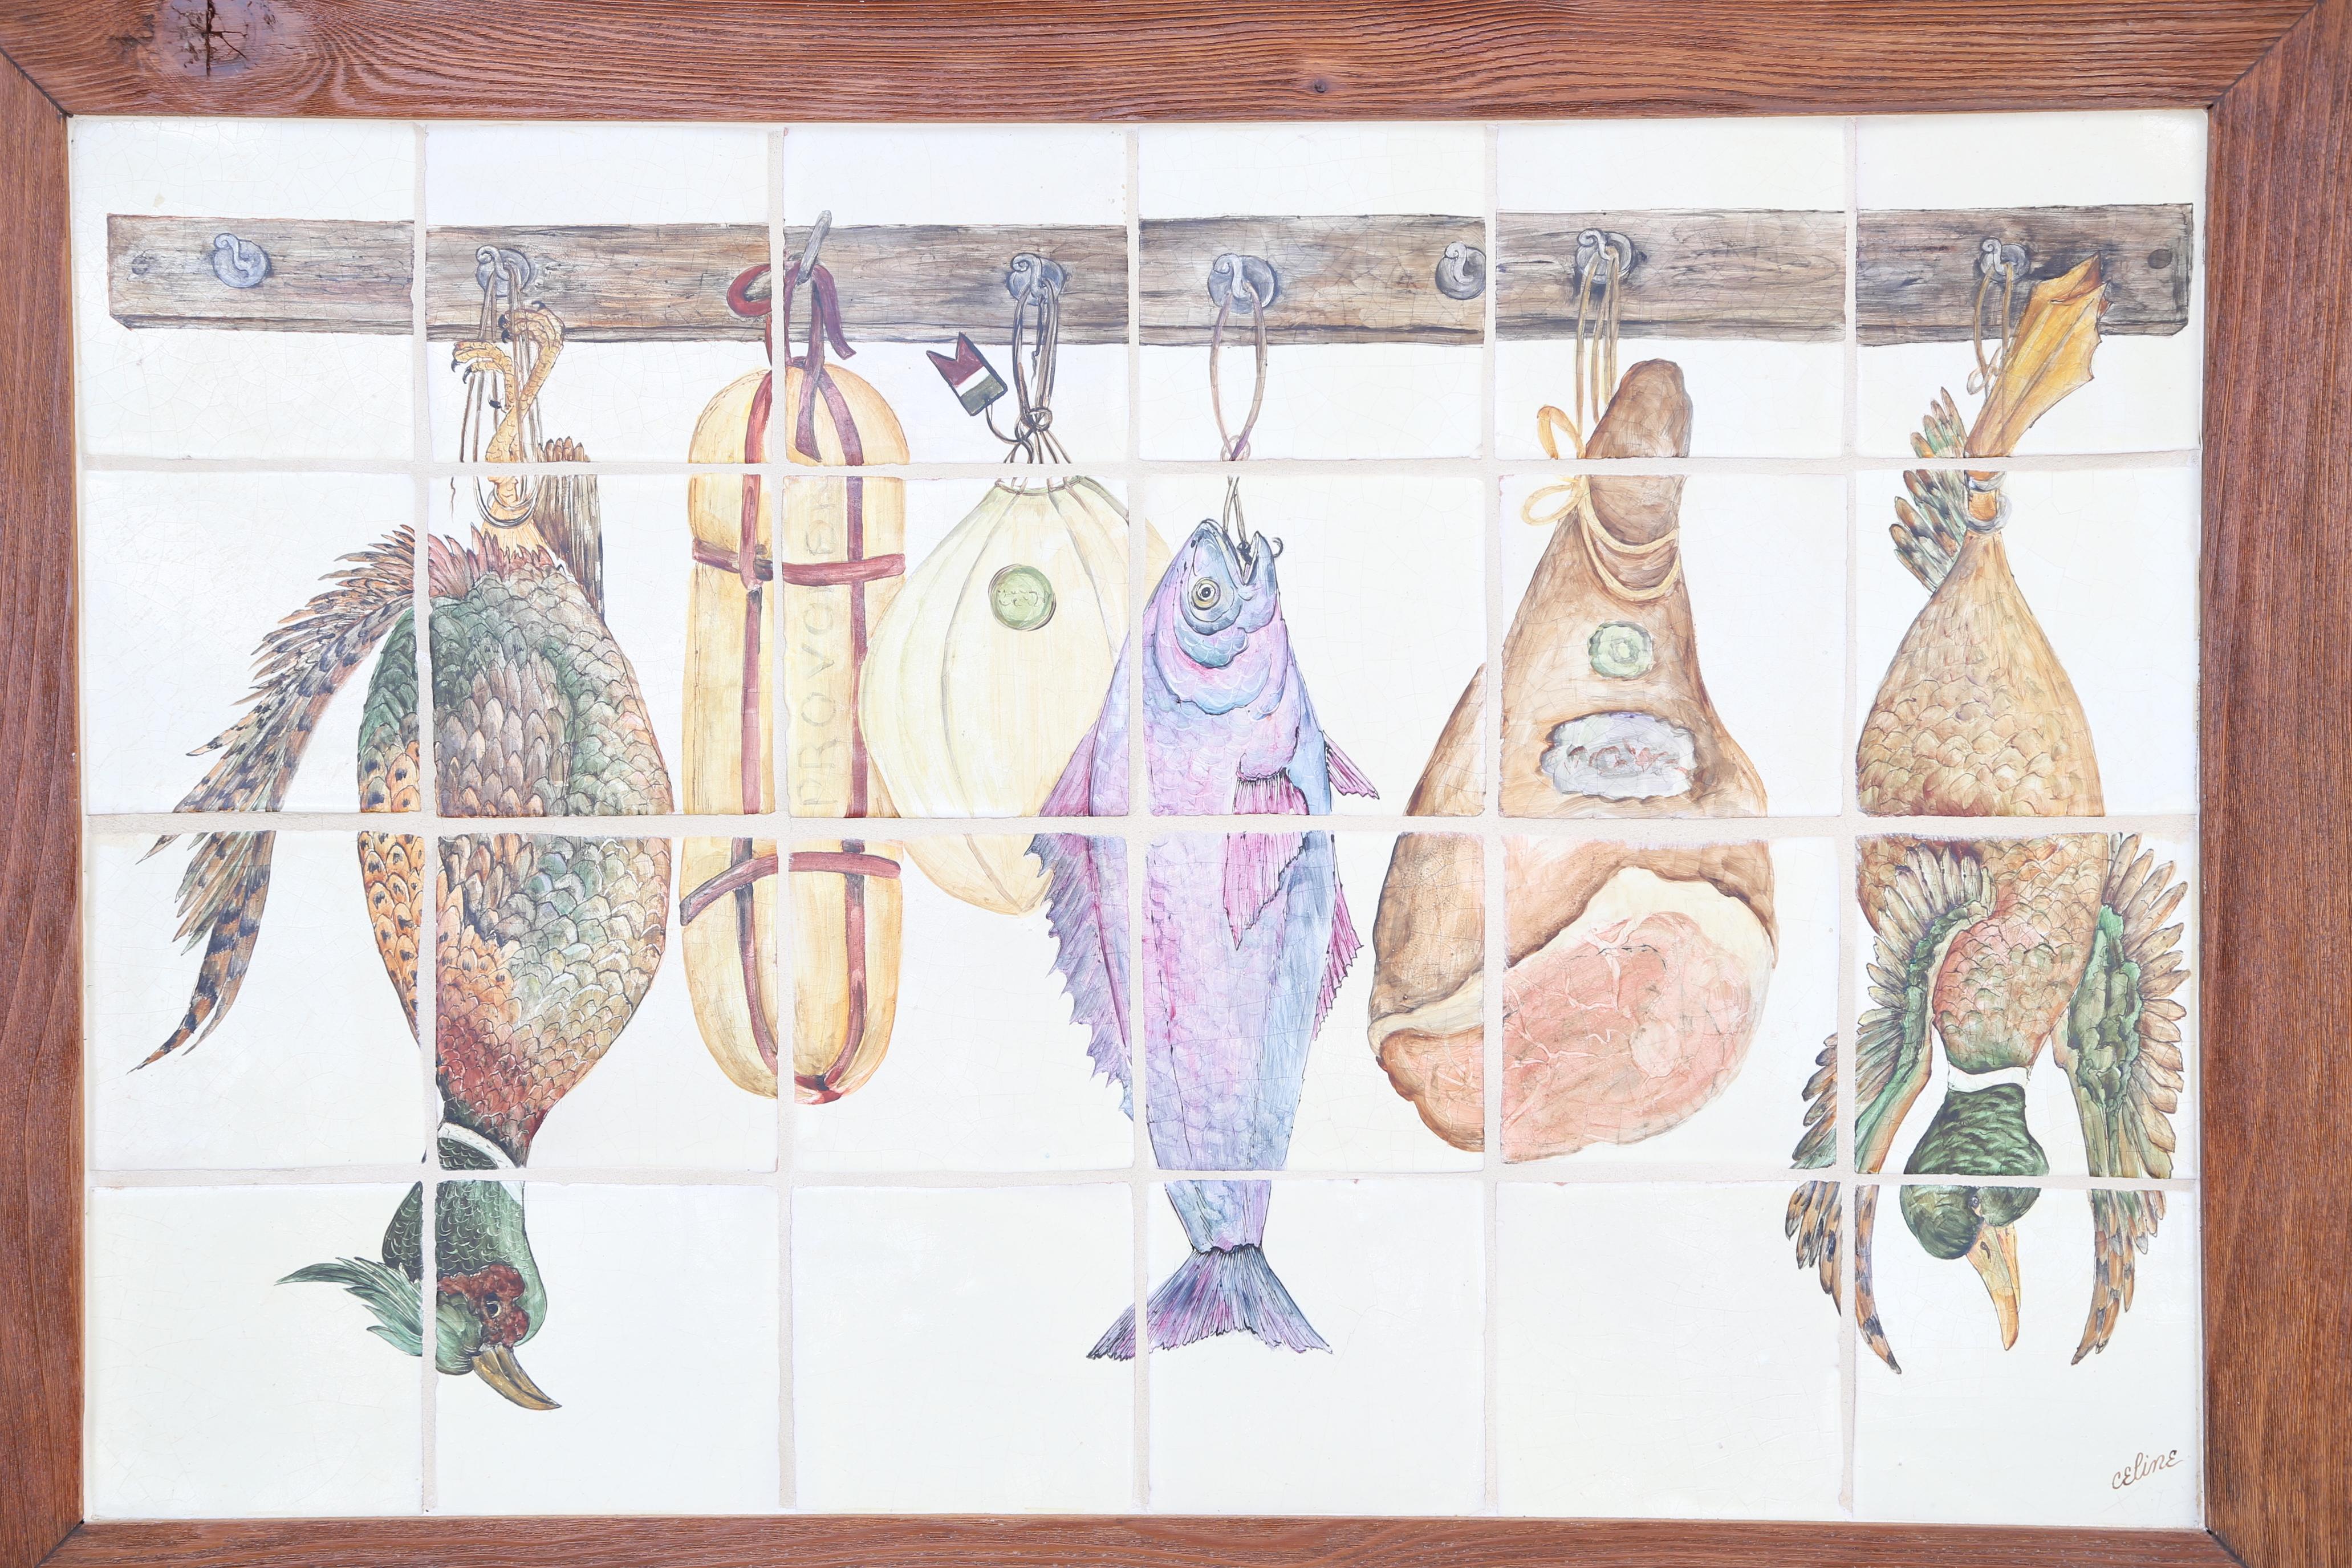 Hand painted pictures of meats, cheese, fowl and fish on tile. Mounted on wood in cypress wood frame.